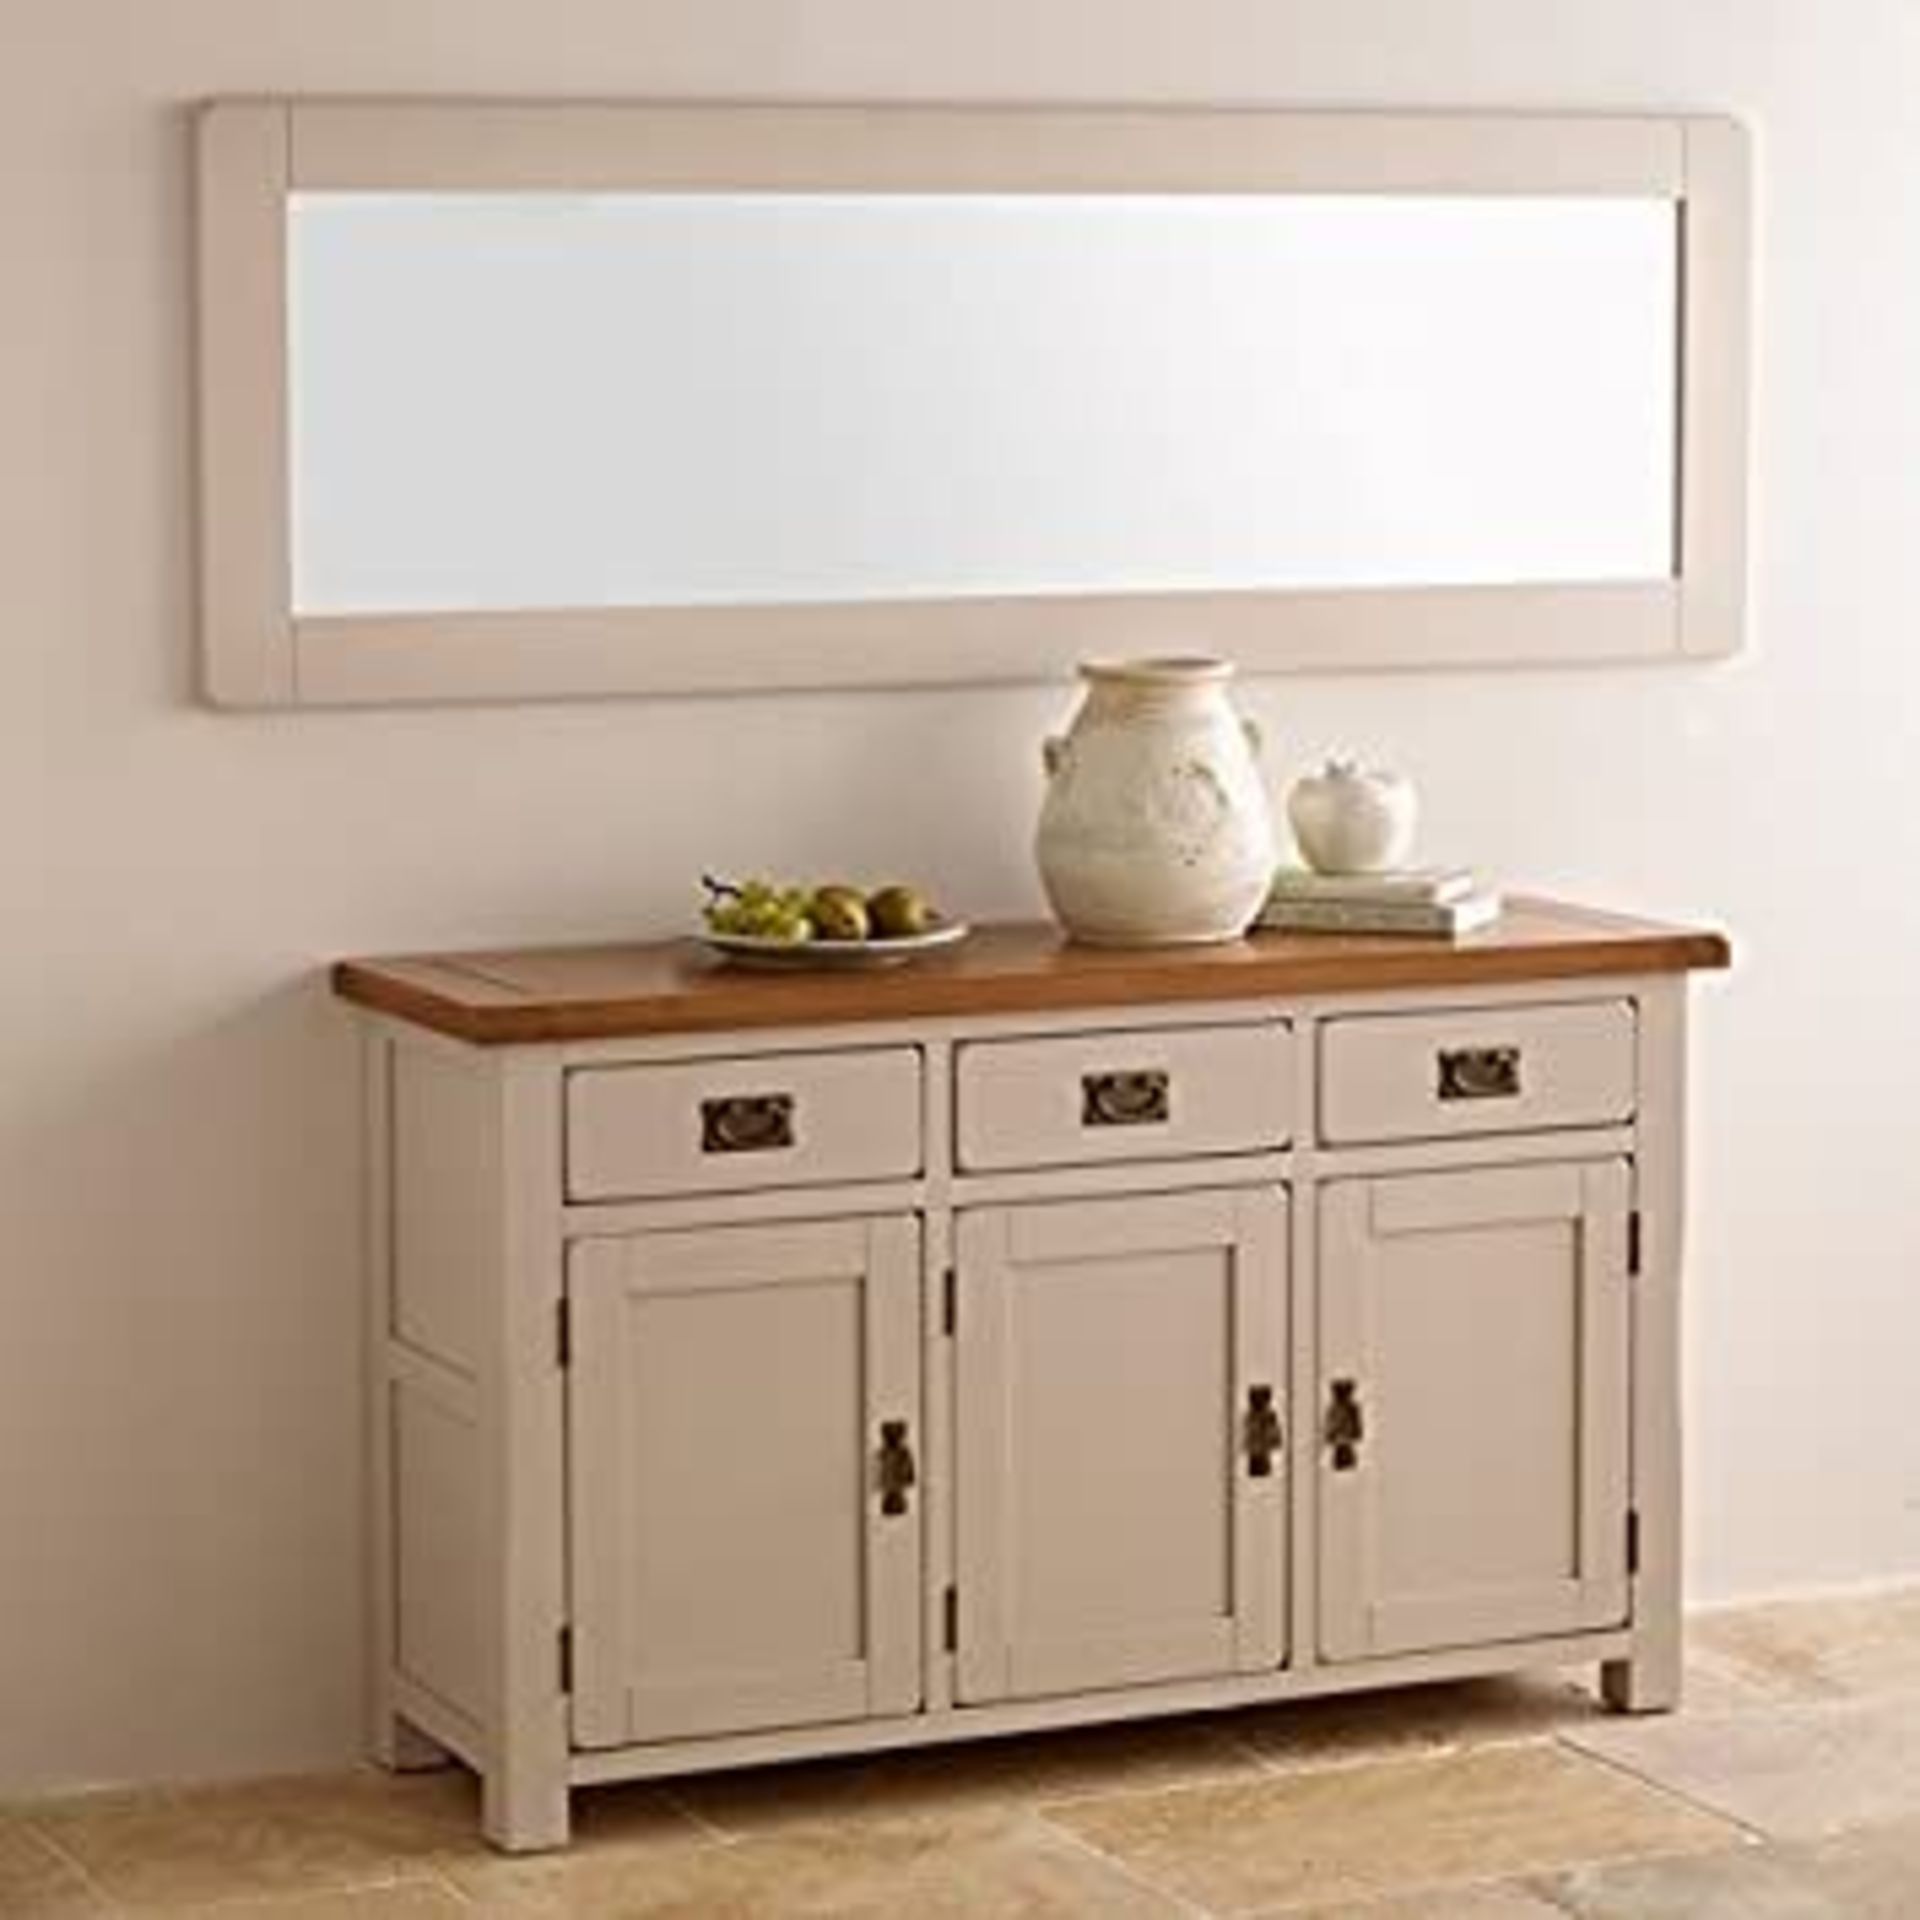 NEW BOXED KEMBLE RUSTIC SOLID OAK & PAINTED WALL MIRROR. 1200x600MM. RRP £250. 100% OAK, REAL WOOD